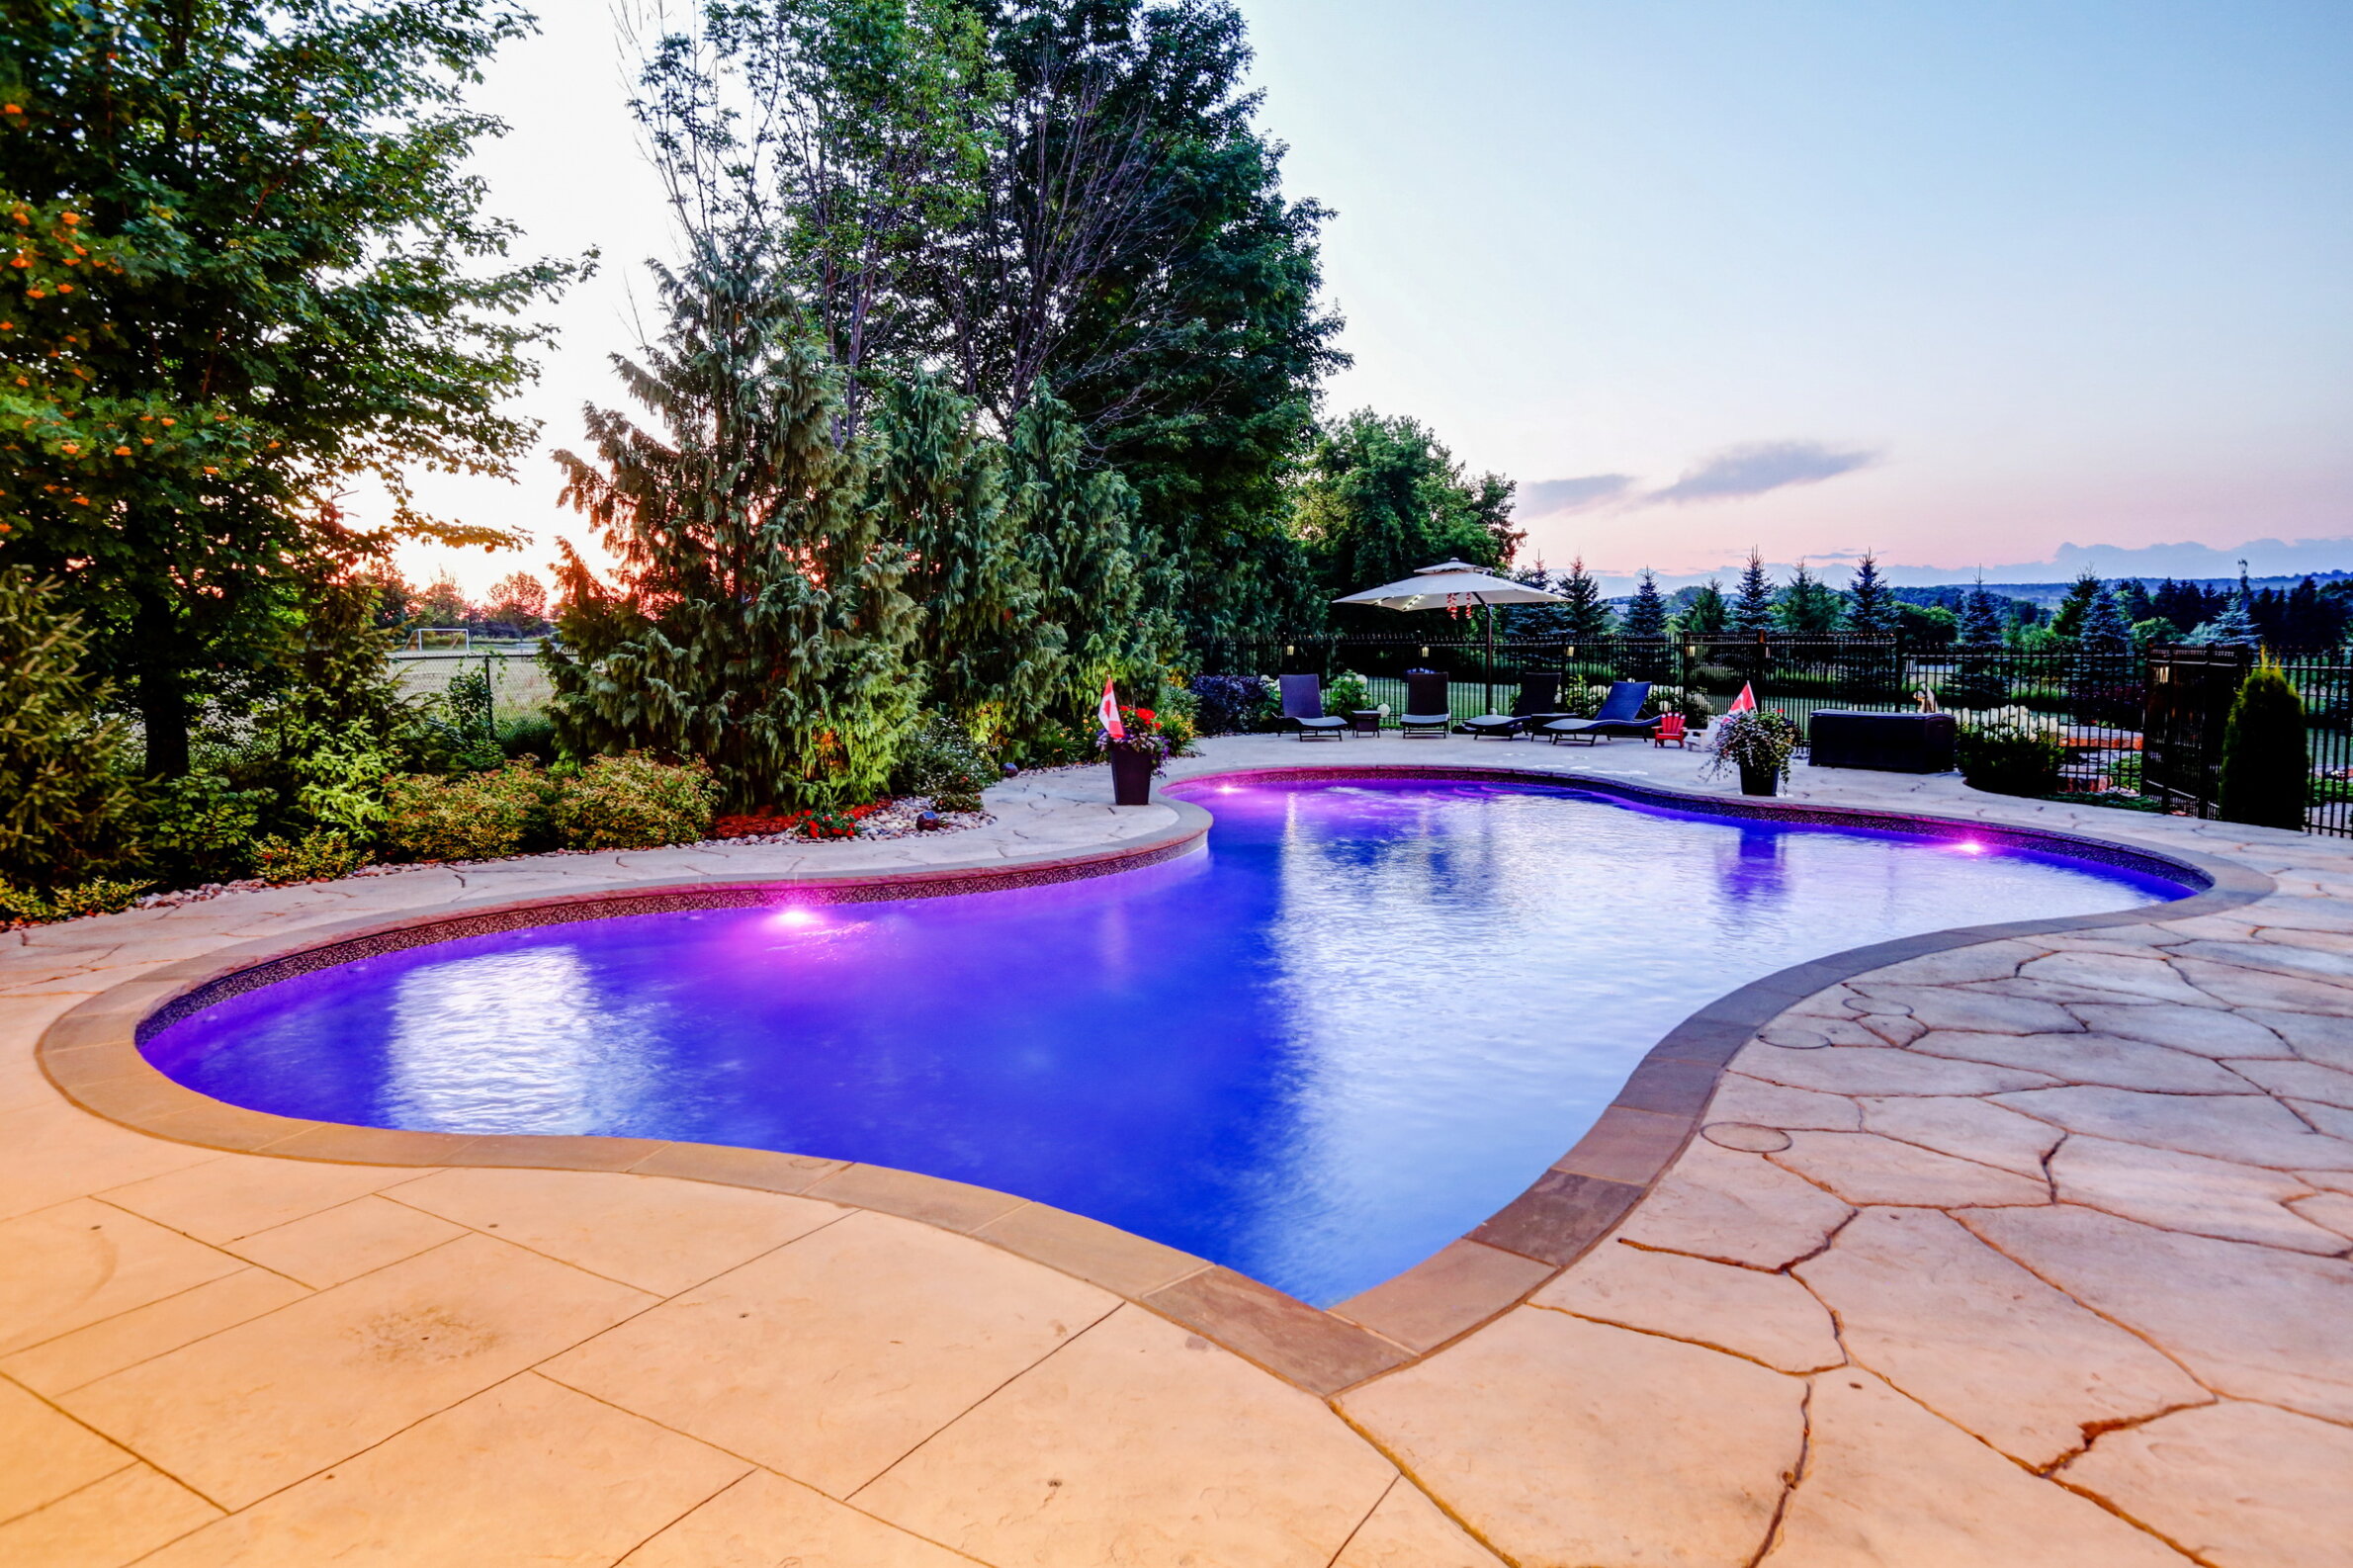 A luxurious outdoor swimming pool with purple lighting at dusk, surrounded by trees, a patio with lounge chairs, and a gazebo.